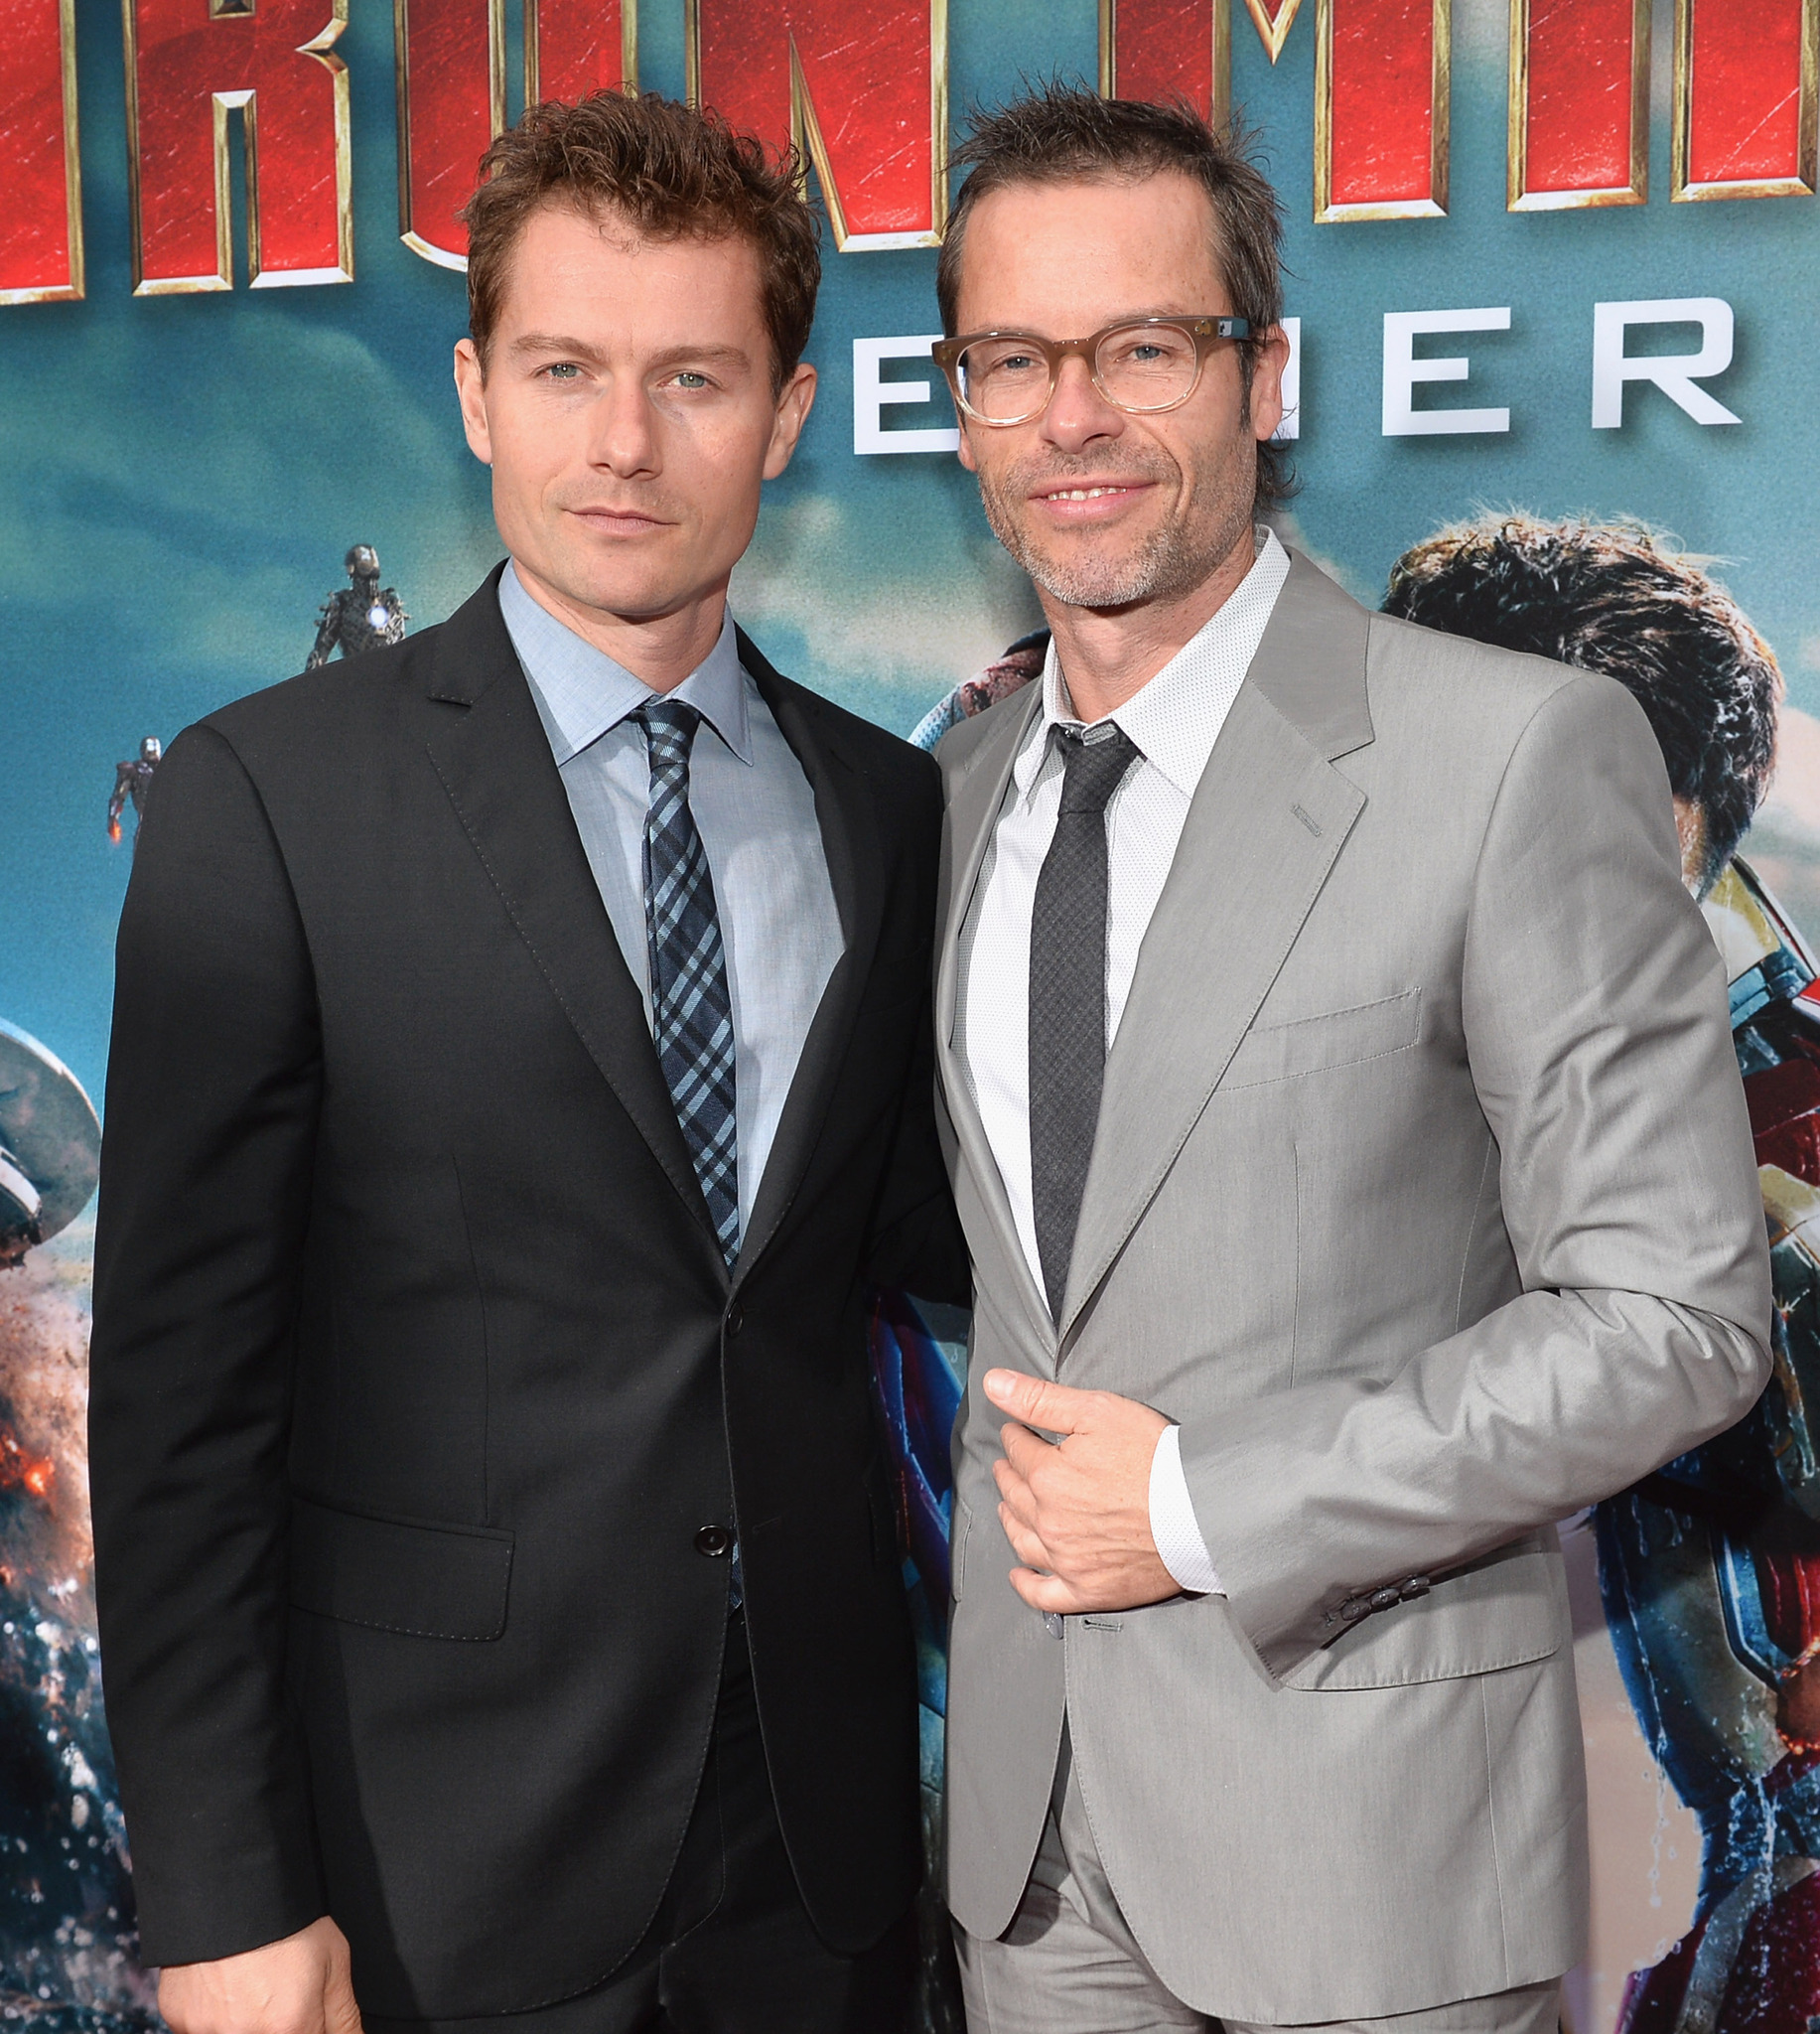 Guy Pearce and James Badge Dale at event of Gelezinis zmogus 3 (2013)